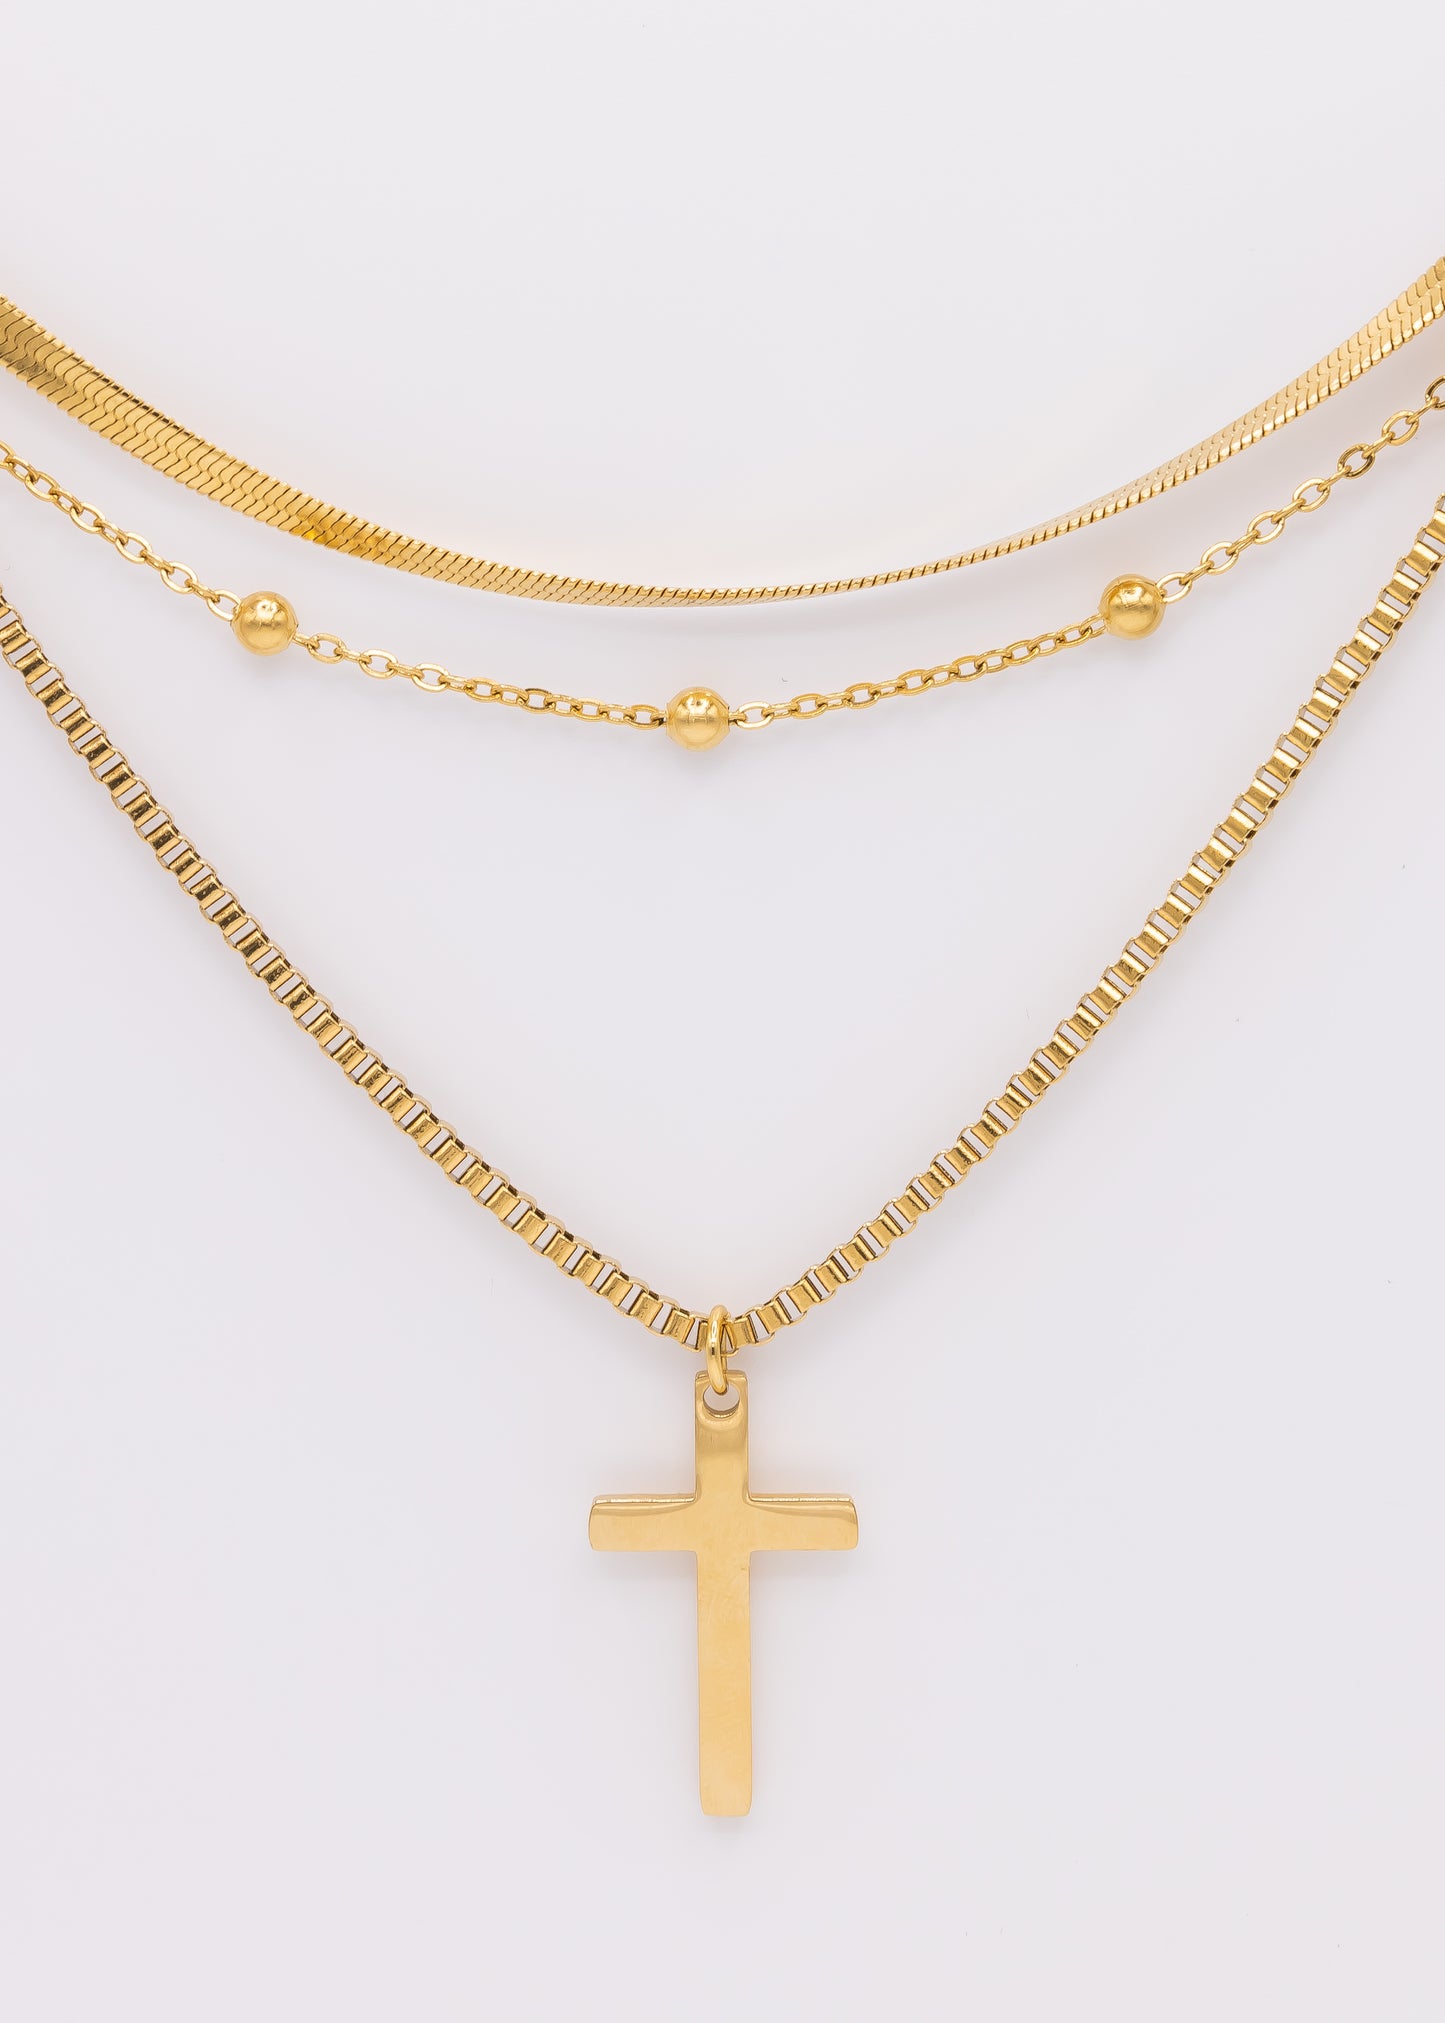 Stainless Steel Gold Chain Cross Necklace